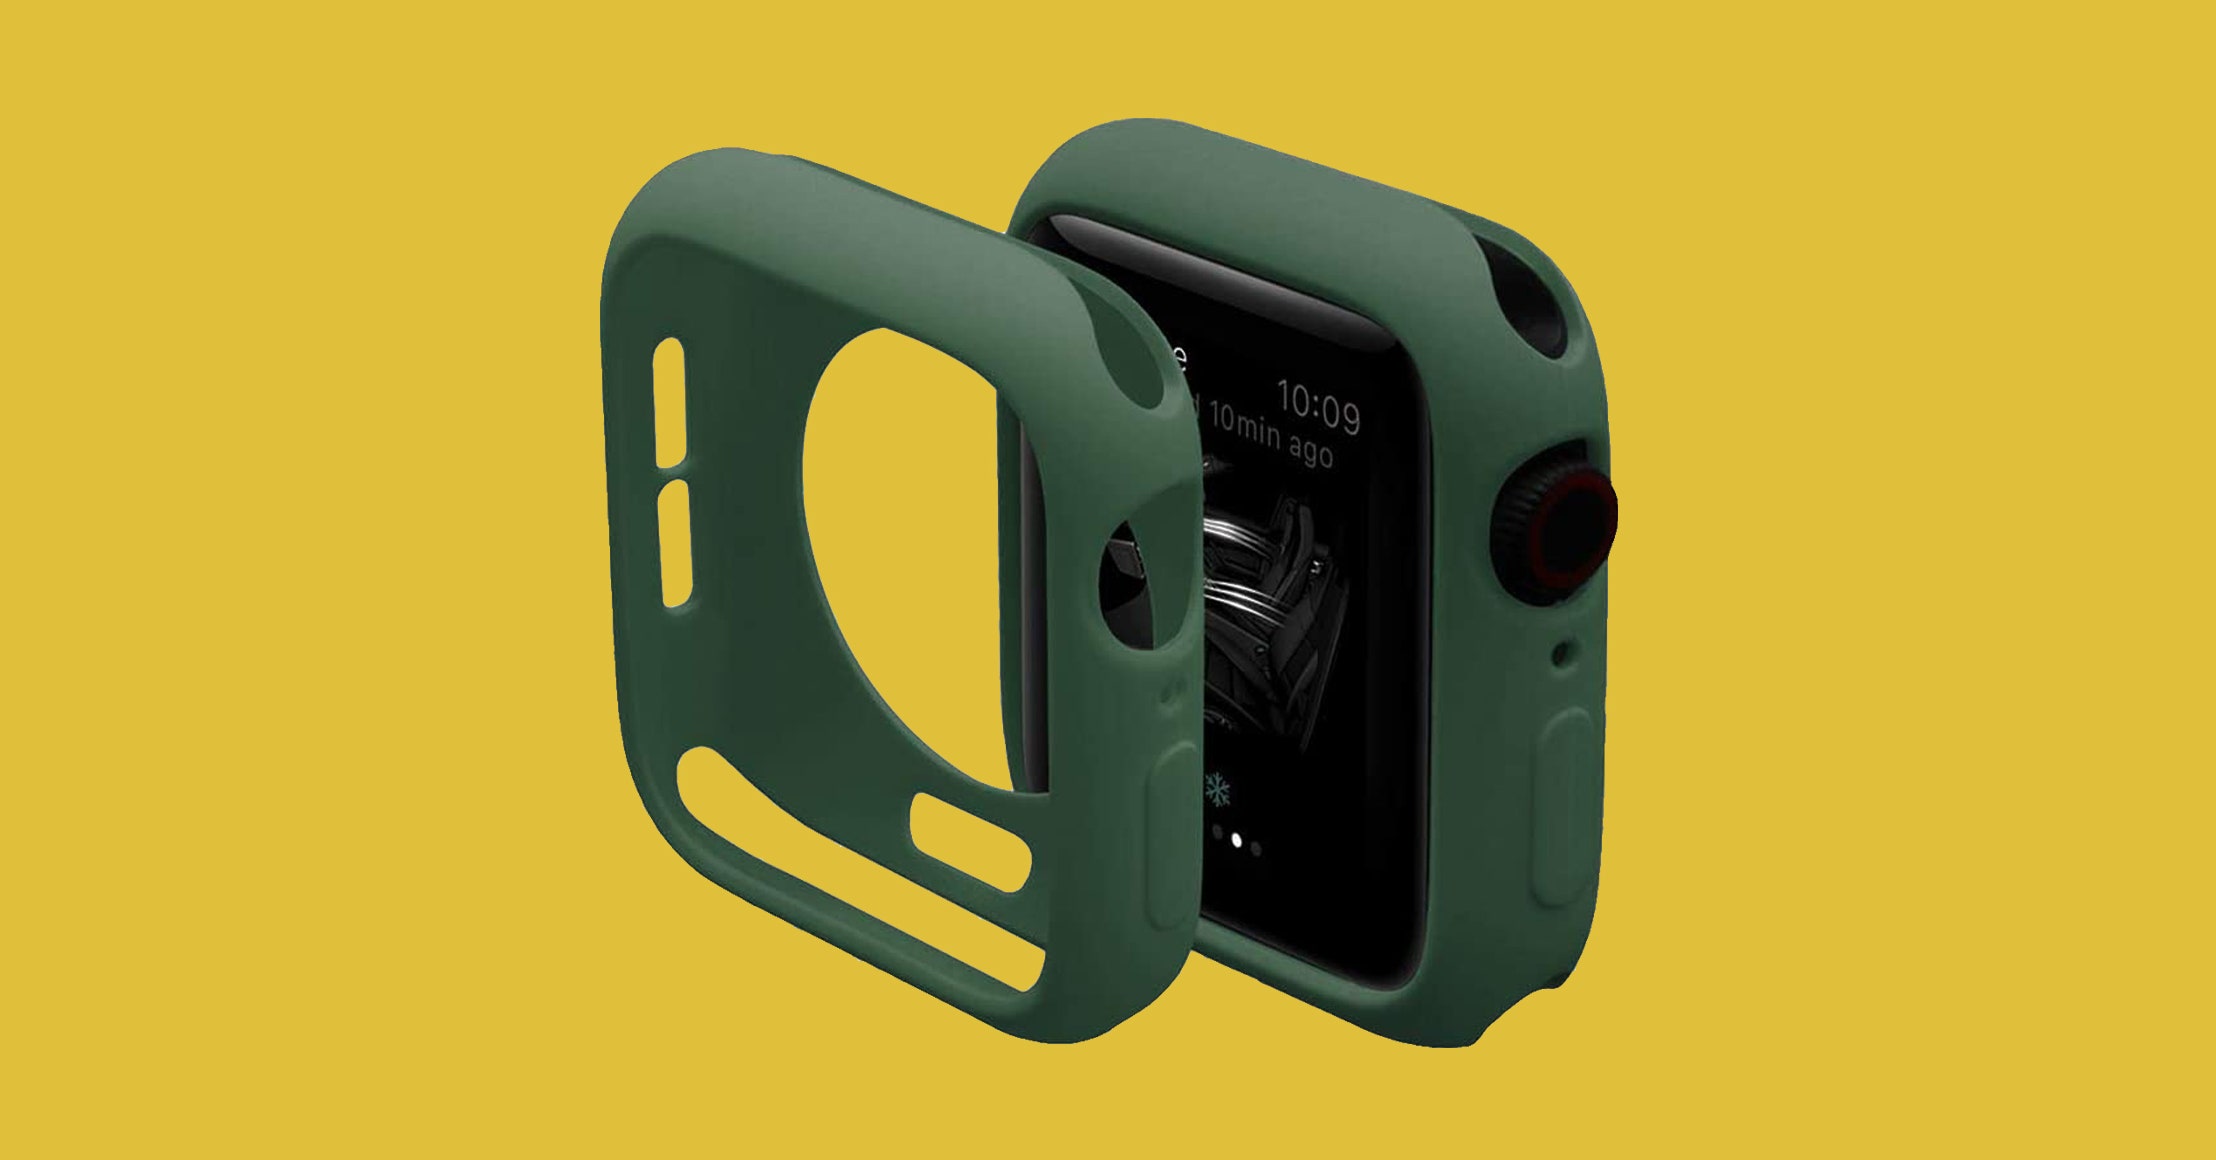 10 Best Apple Watch Accessories (2022): Bands, Chargers, Cases, and Screen Protectors